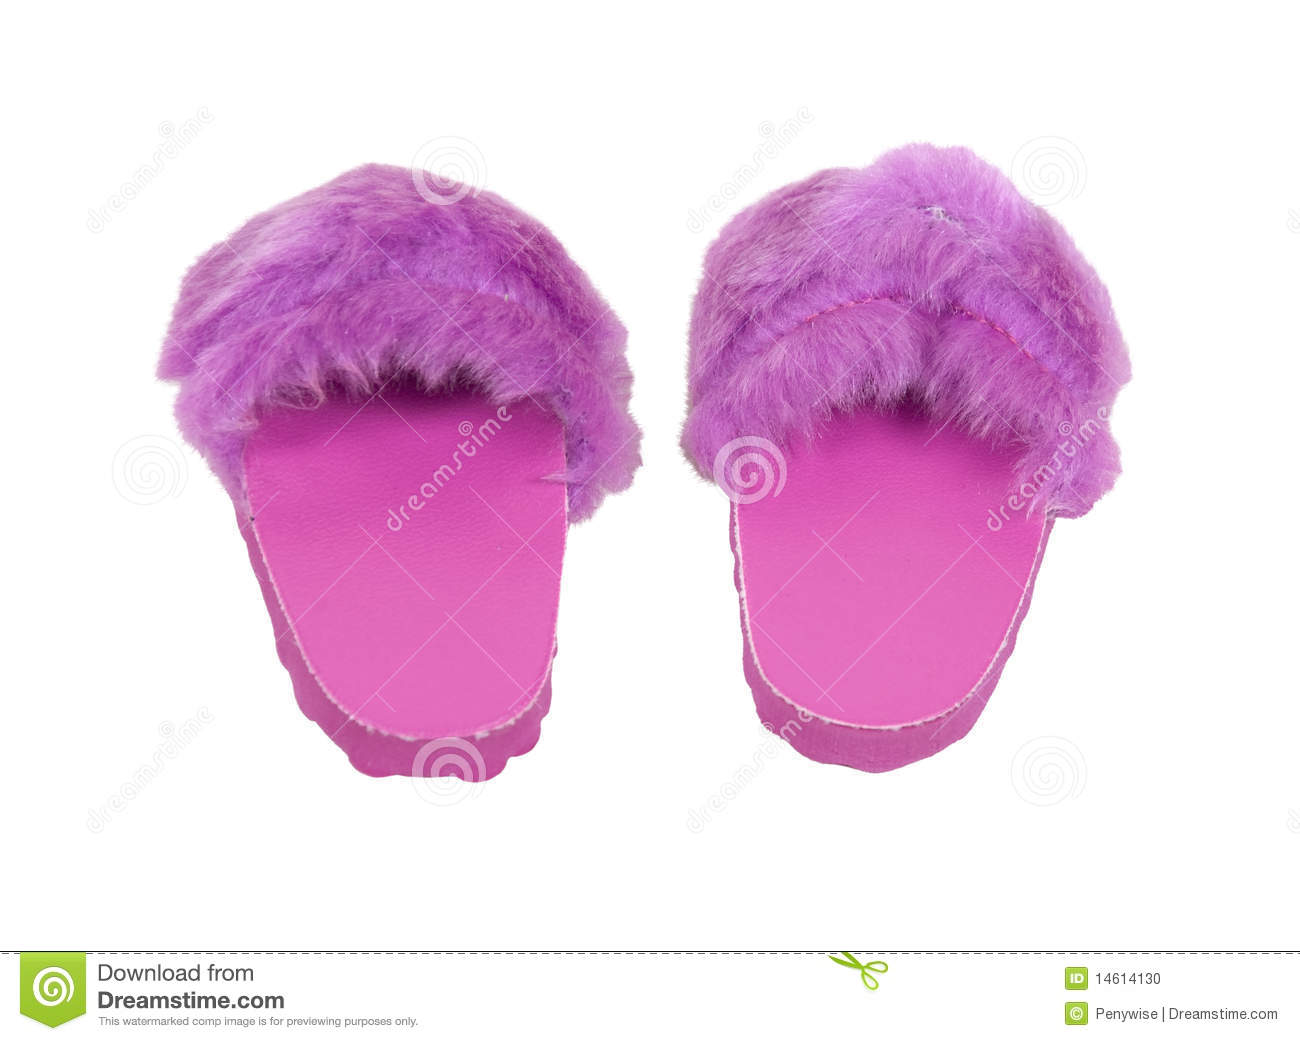 Fuzzy Pink Slippers Ready To Wear At Home When Relaxing In Luxury    